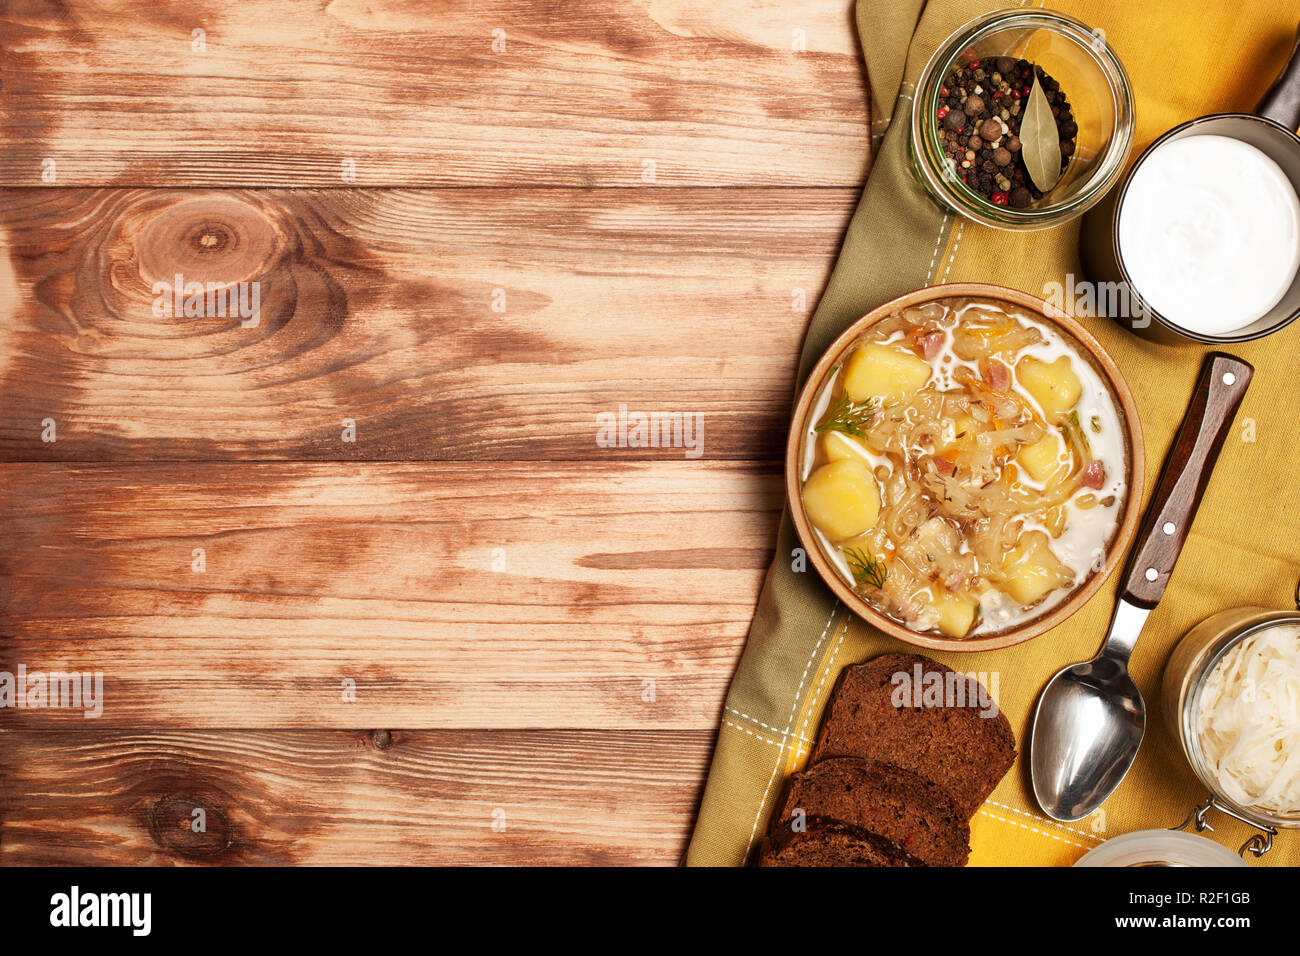 Sauerkraut soup on a wooden board.Photographed overhead on rustic wood.Copy space. Stock Photo